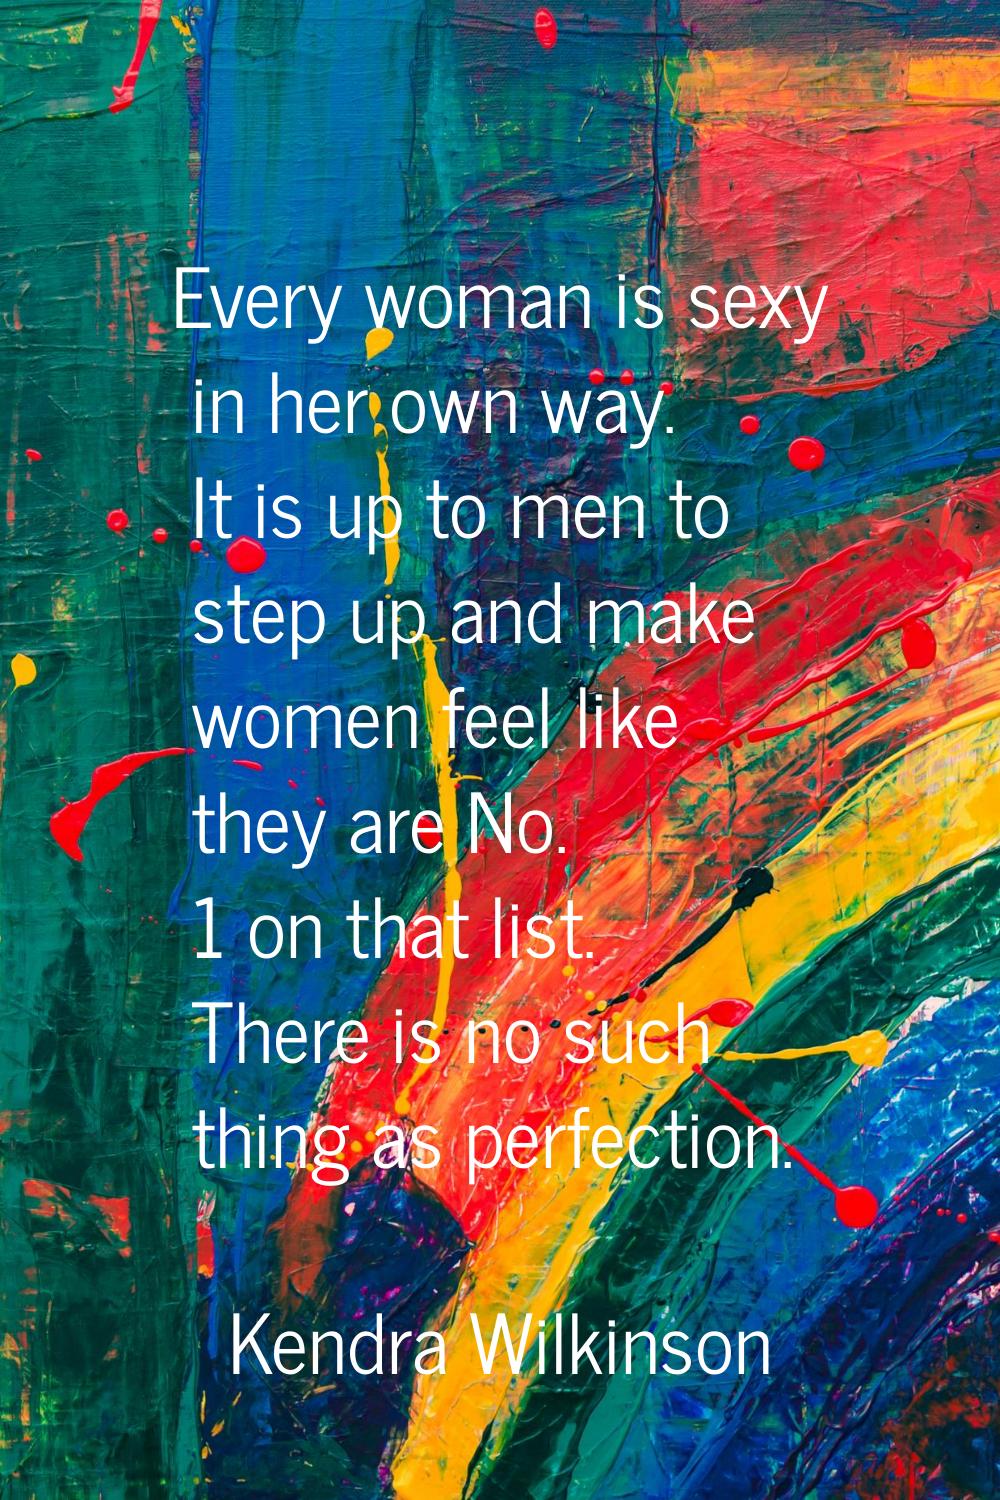 Every woman is sexy in her own way. It is up to men to step up and make women feel like they are No